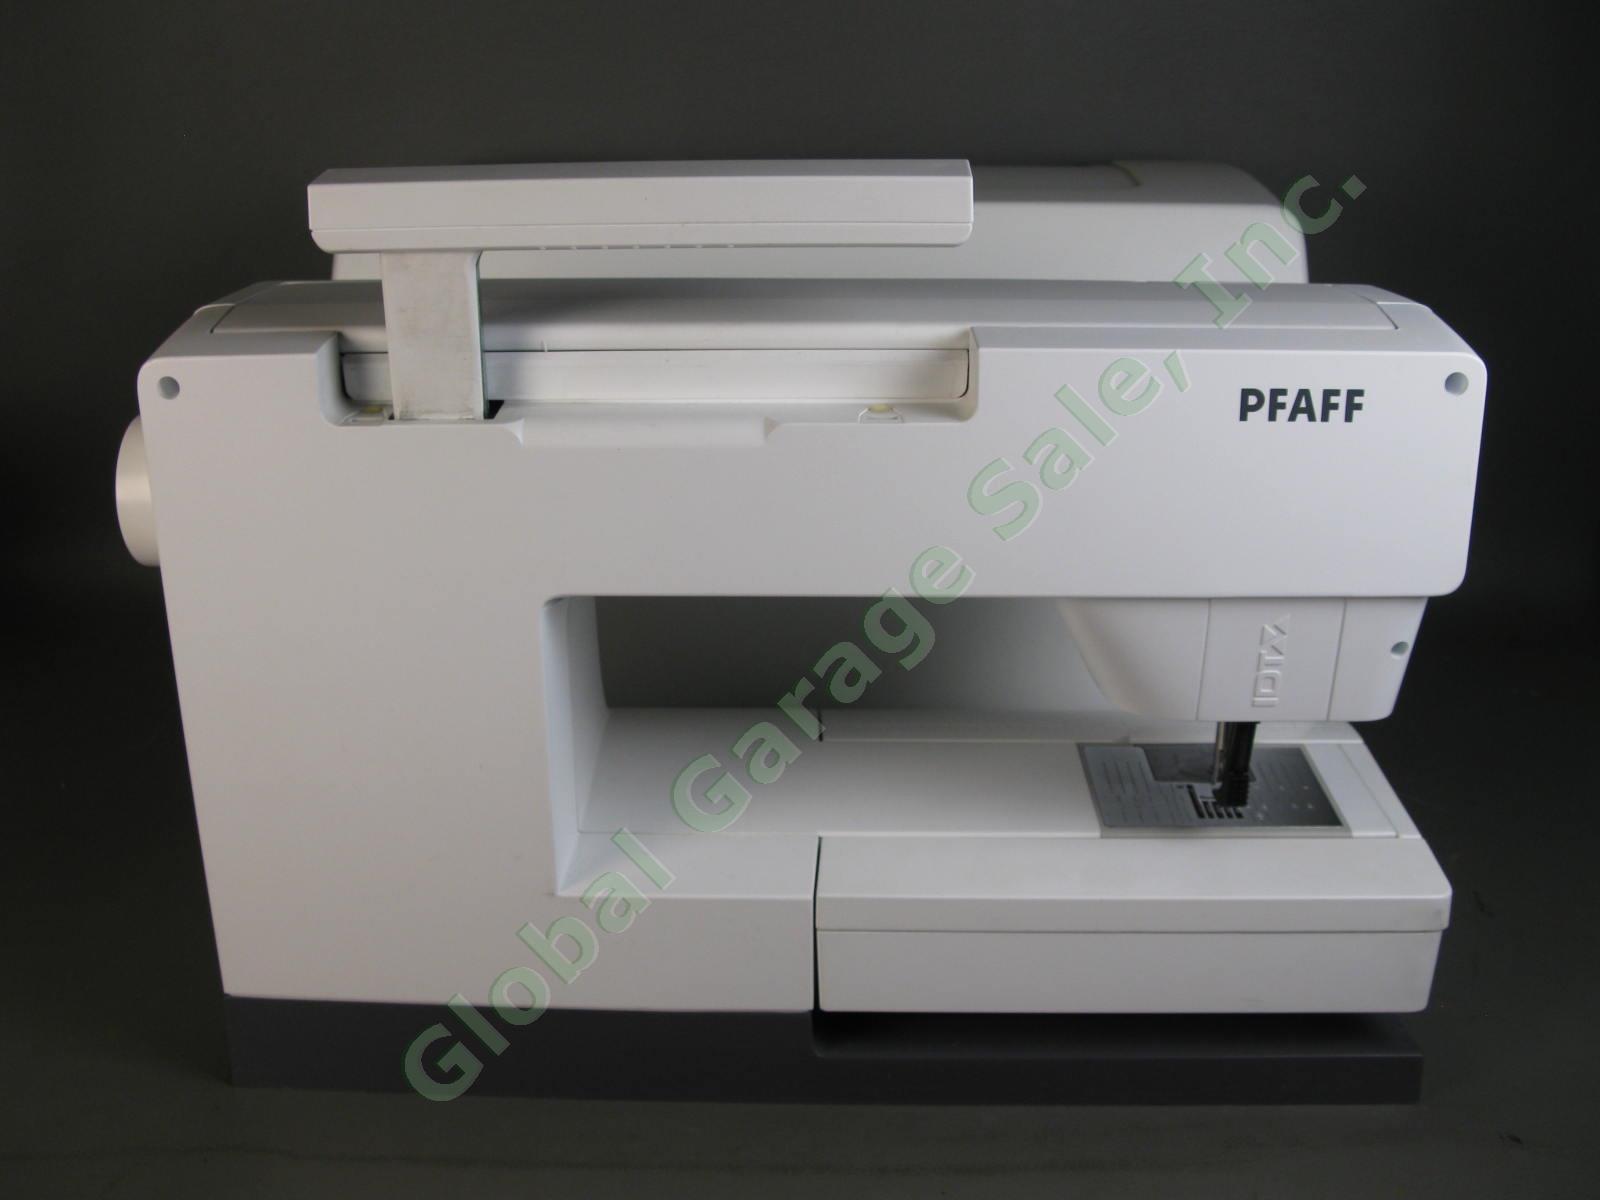 Pfaff Quilt Expression 4.0 Sewing Machine One Owner Just Dealer Serviced Cleaned 5